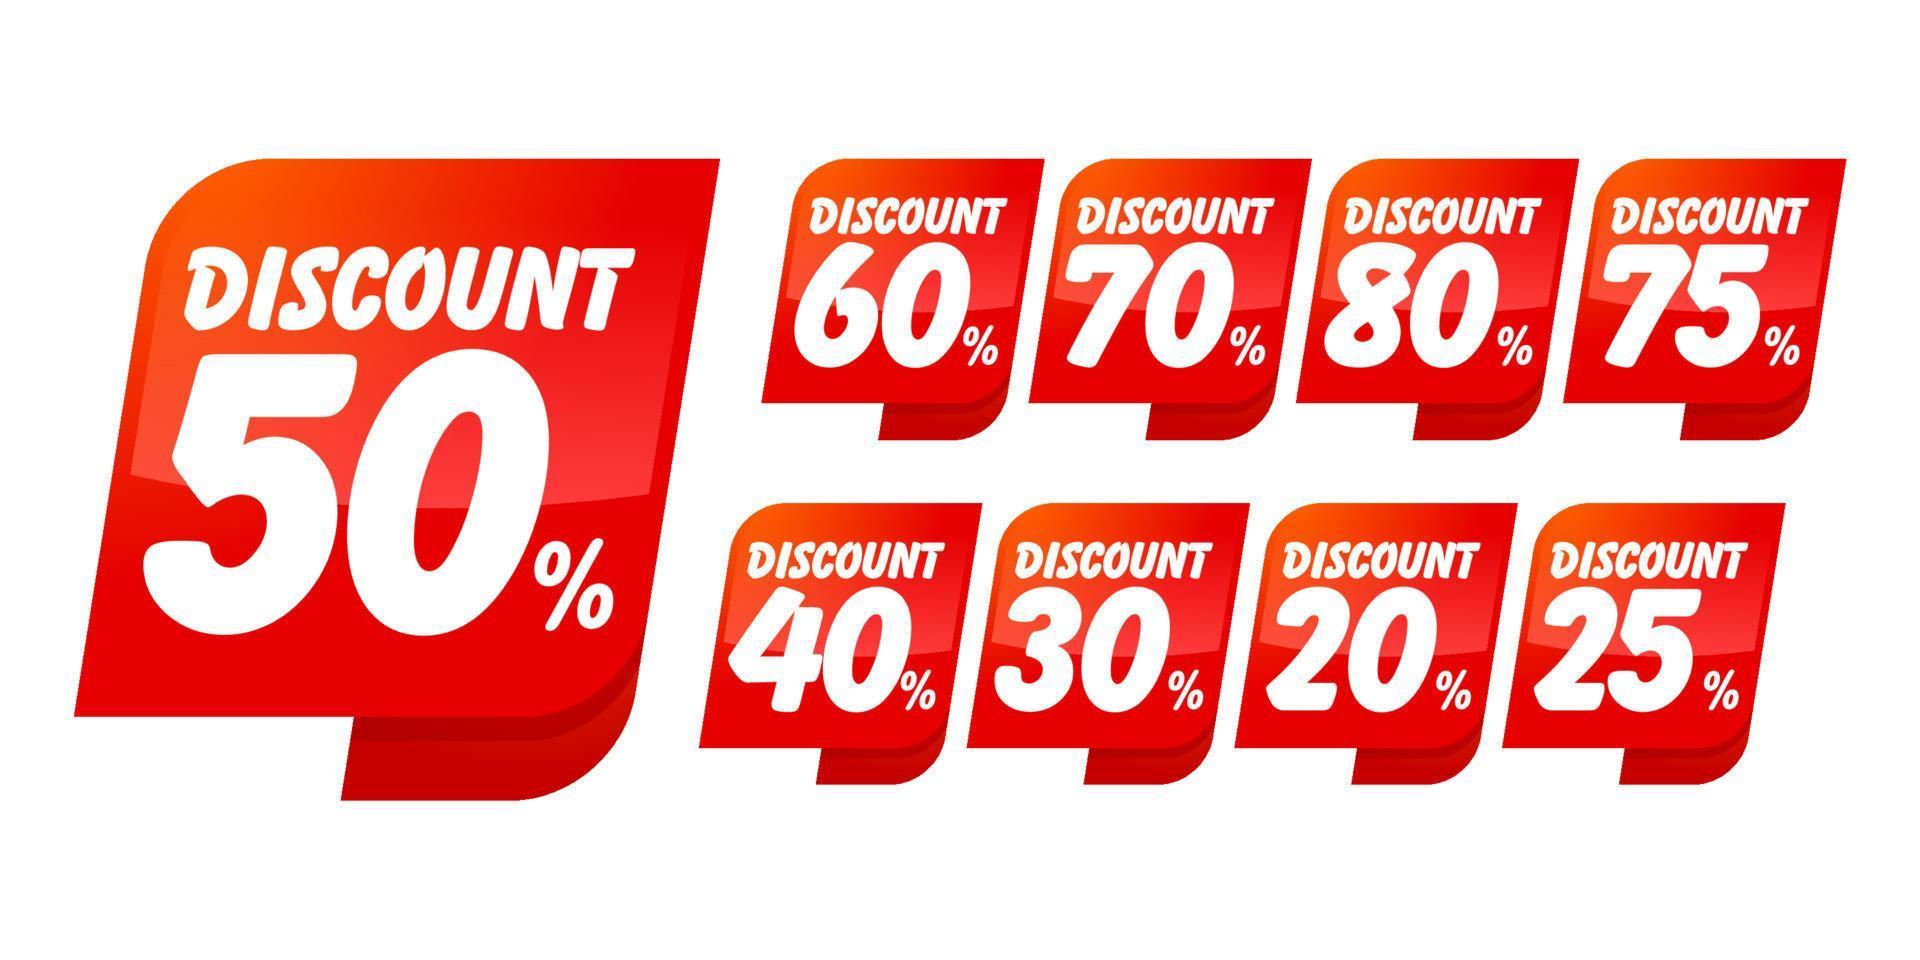 Discount red promotion sticker badge set. Sale Marketing promotional material with different price cut percent, best offer label vector illustration isolated on white background